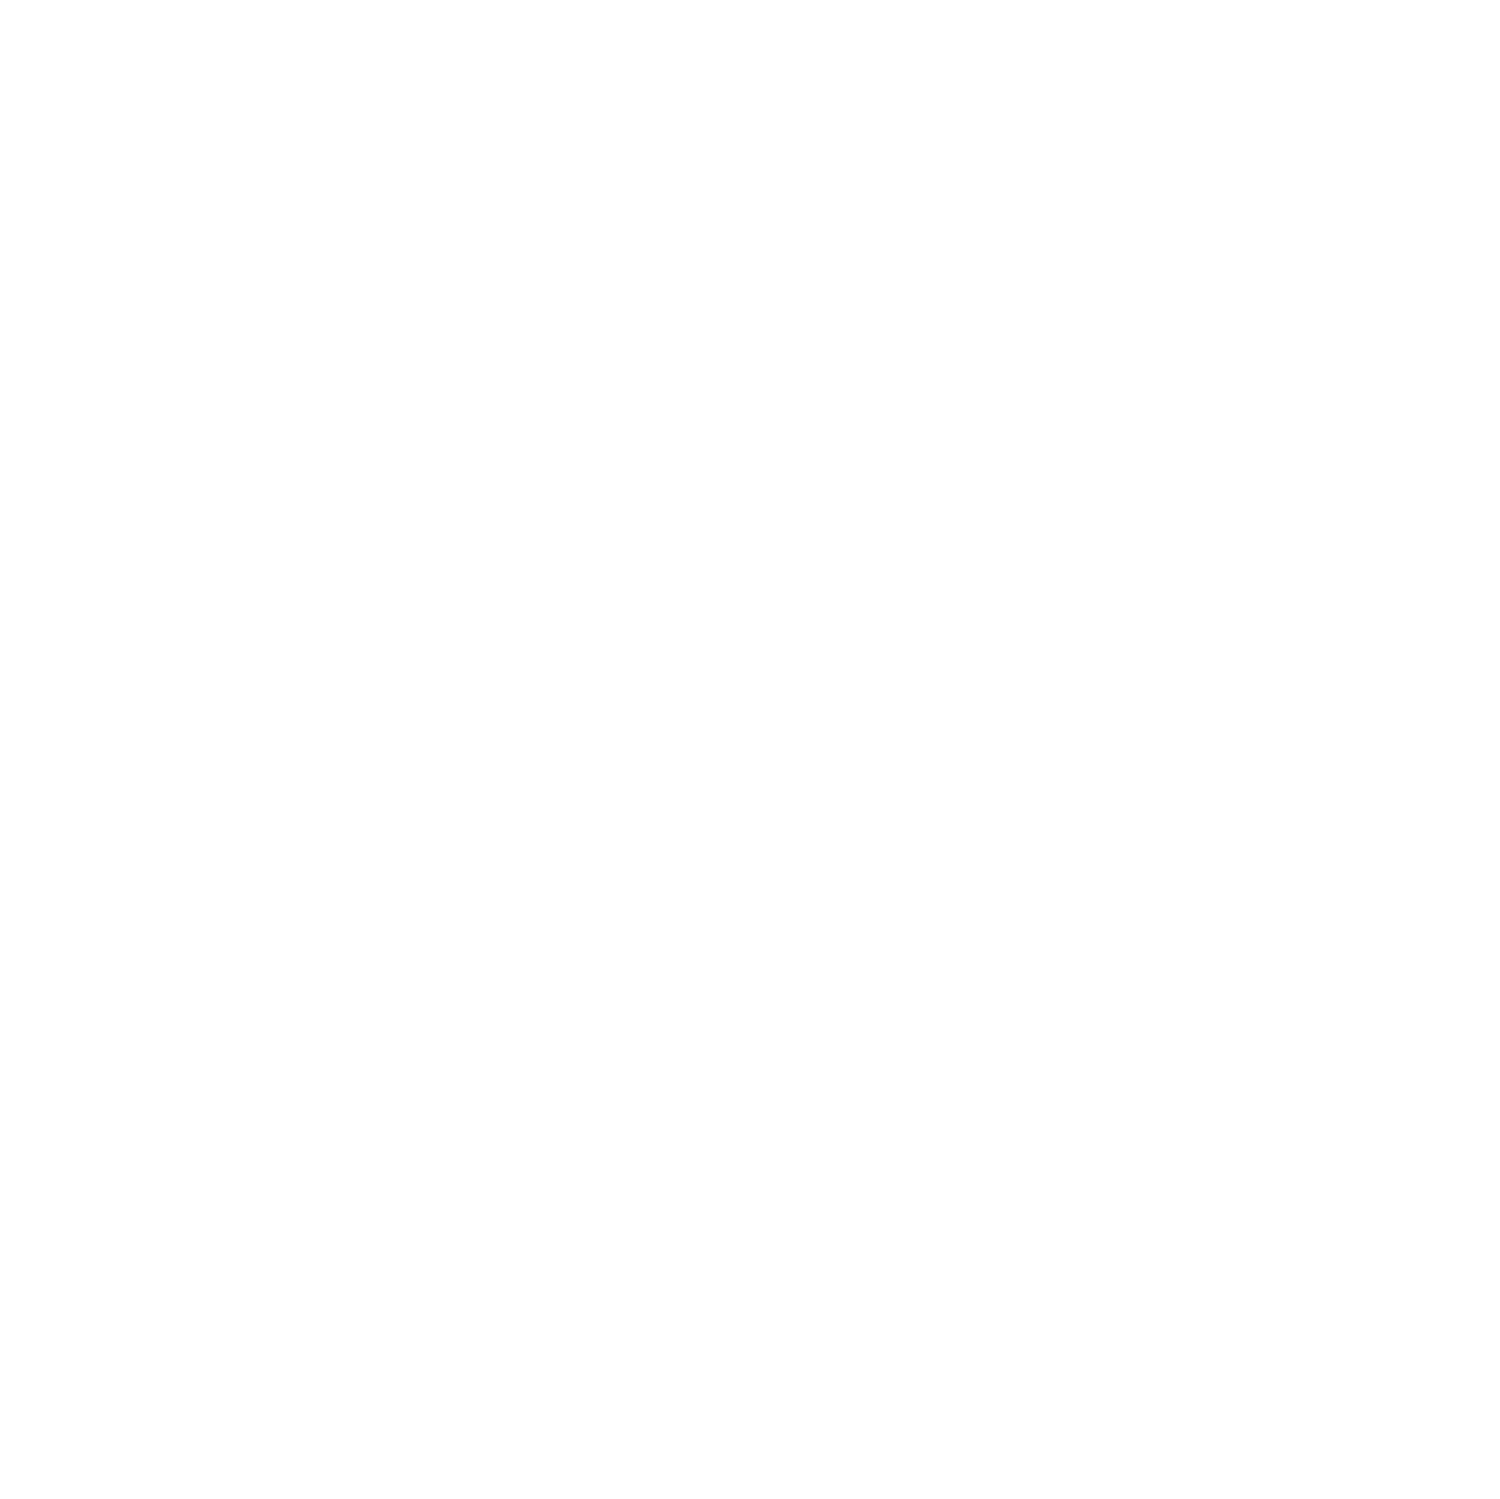 We Heal From Within